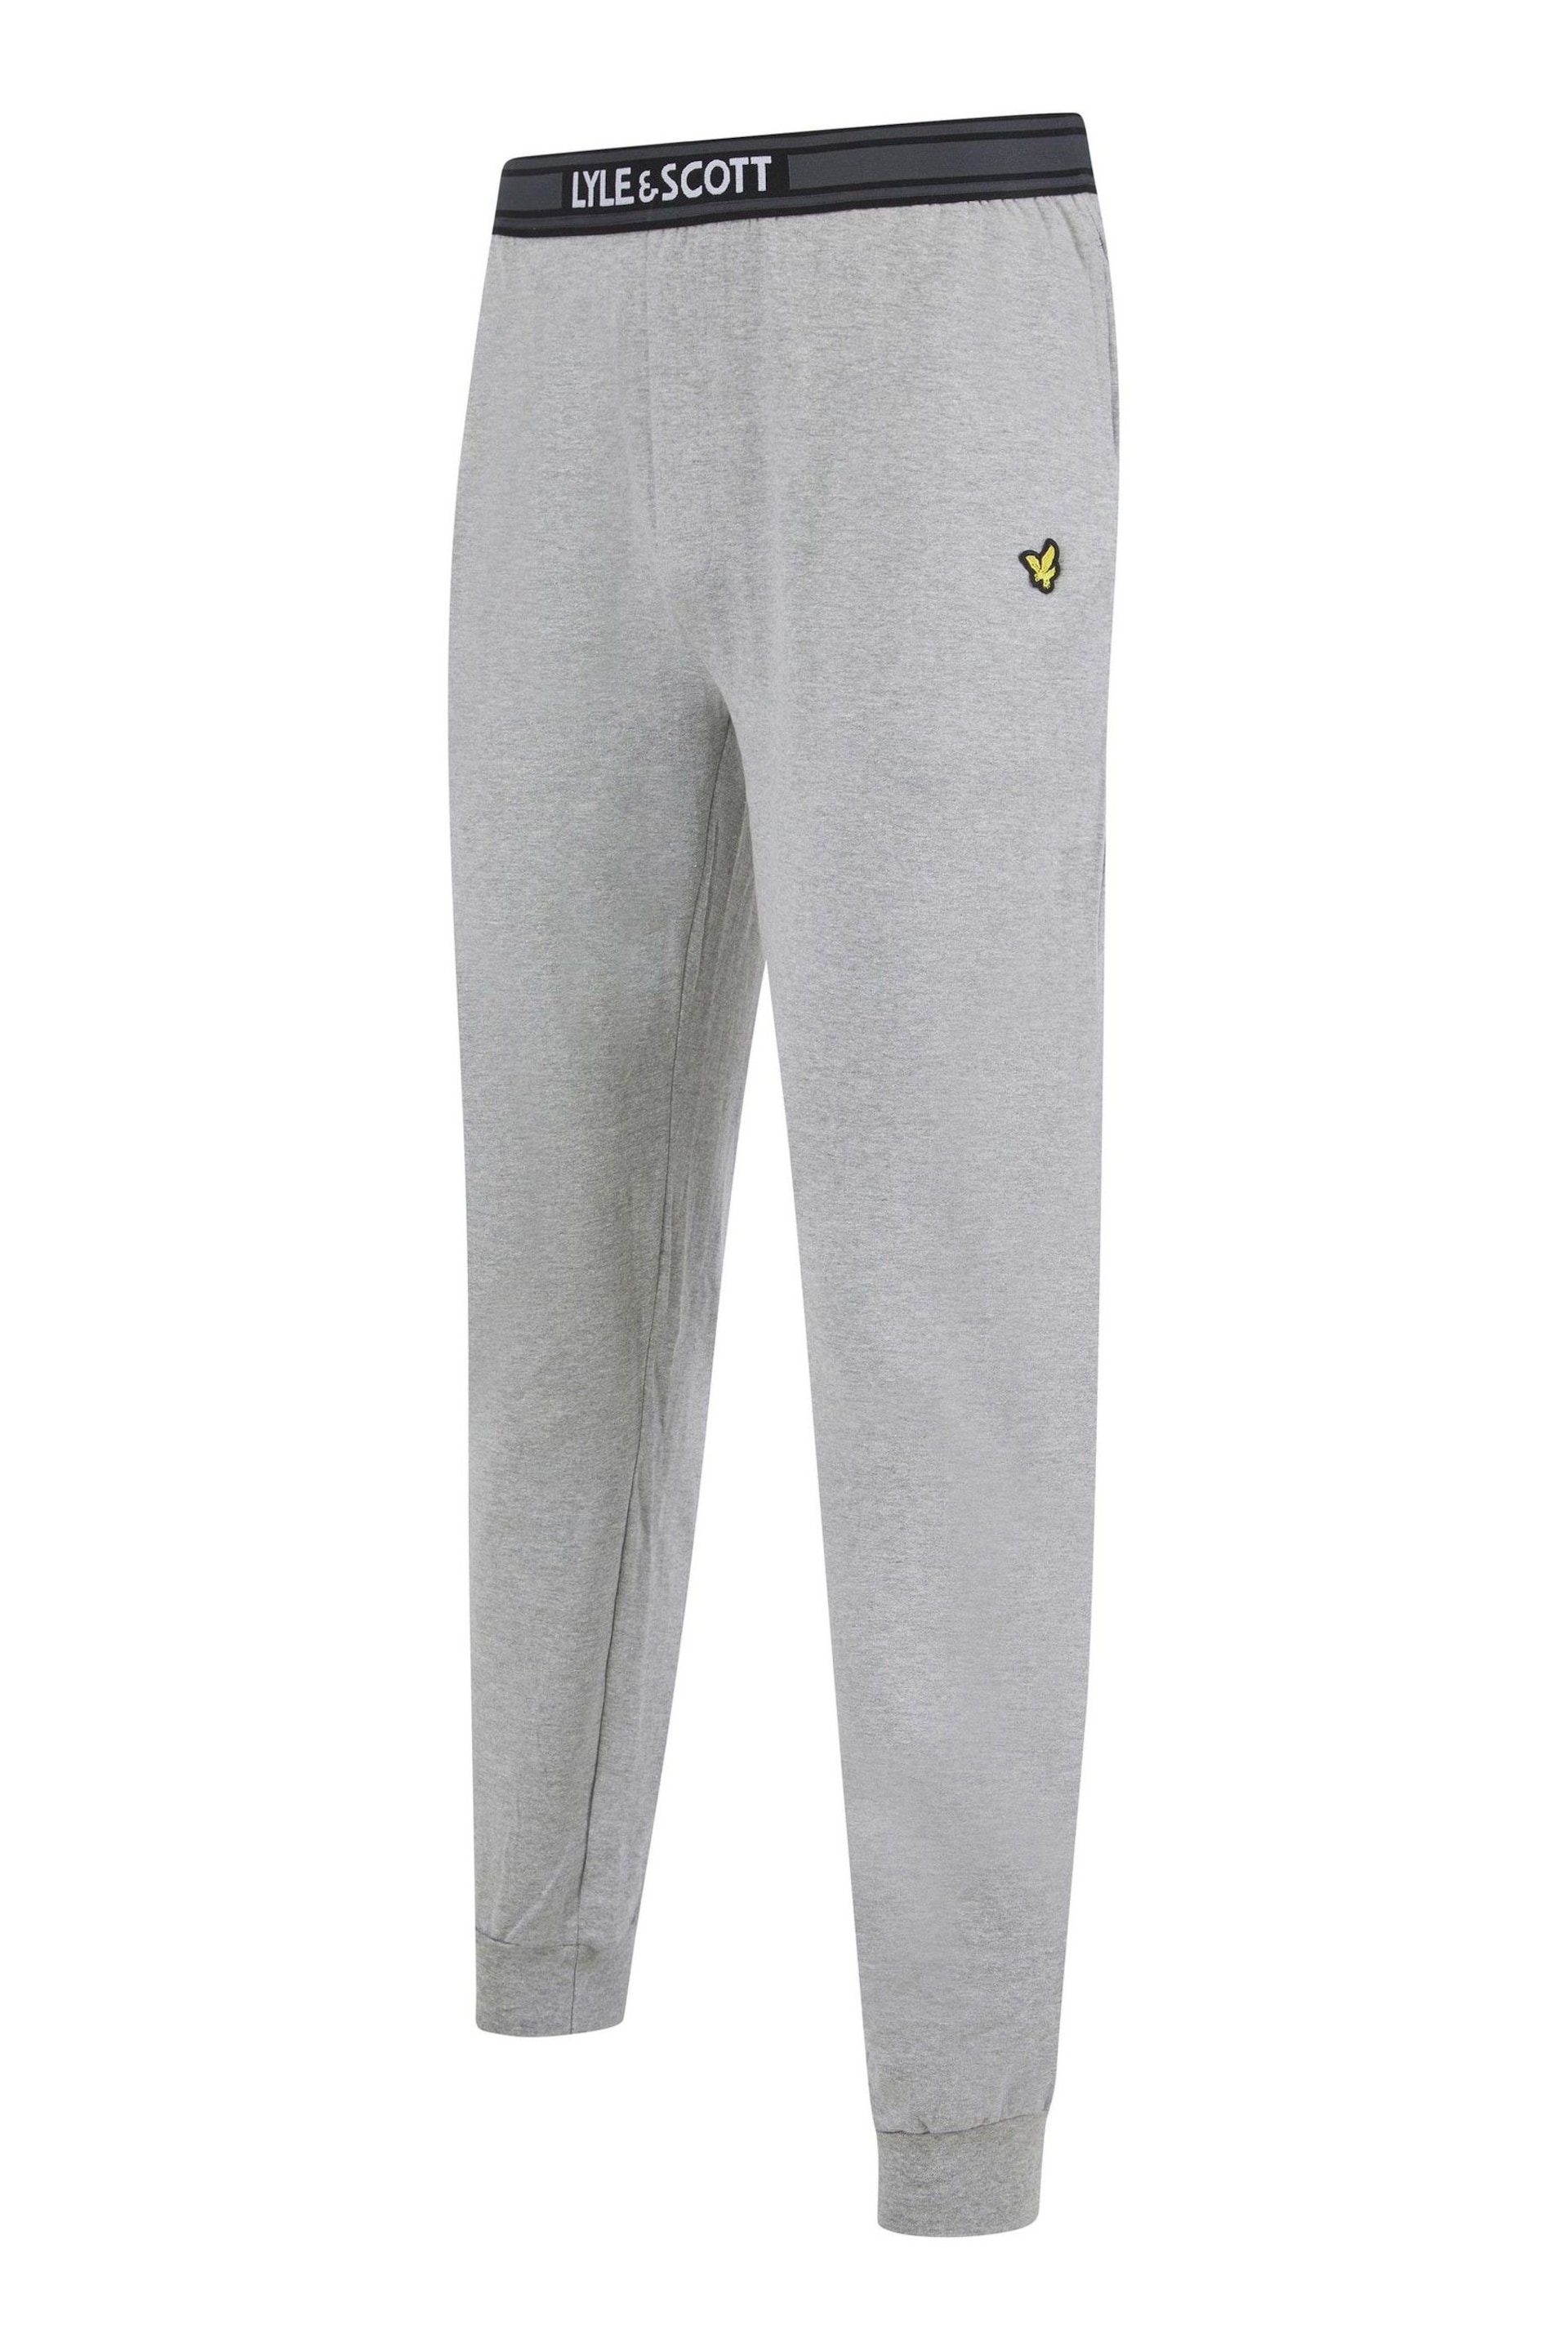 Lyle & Scott Grey Cash Top And Joggers Set - Image 5 of 6